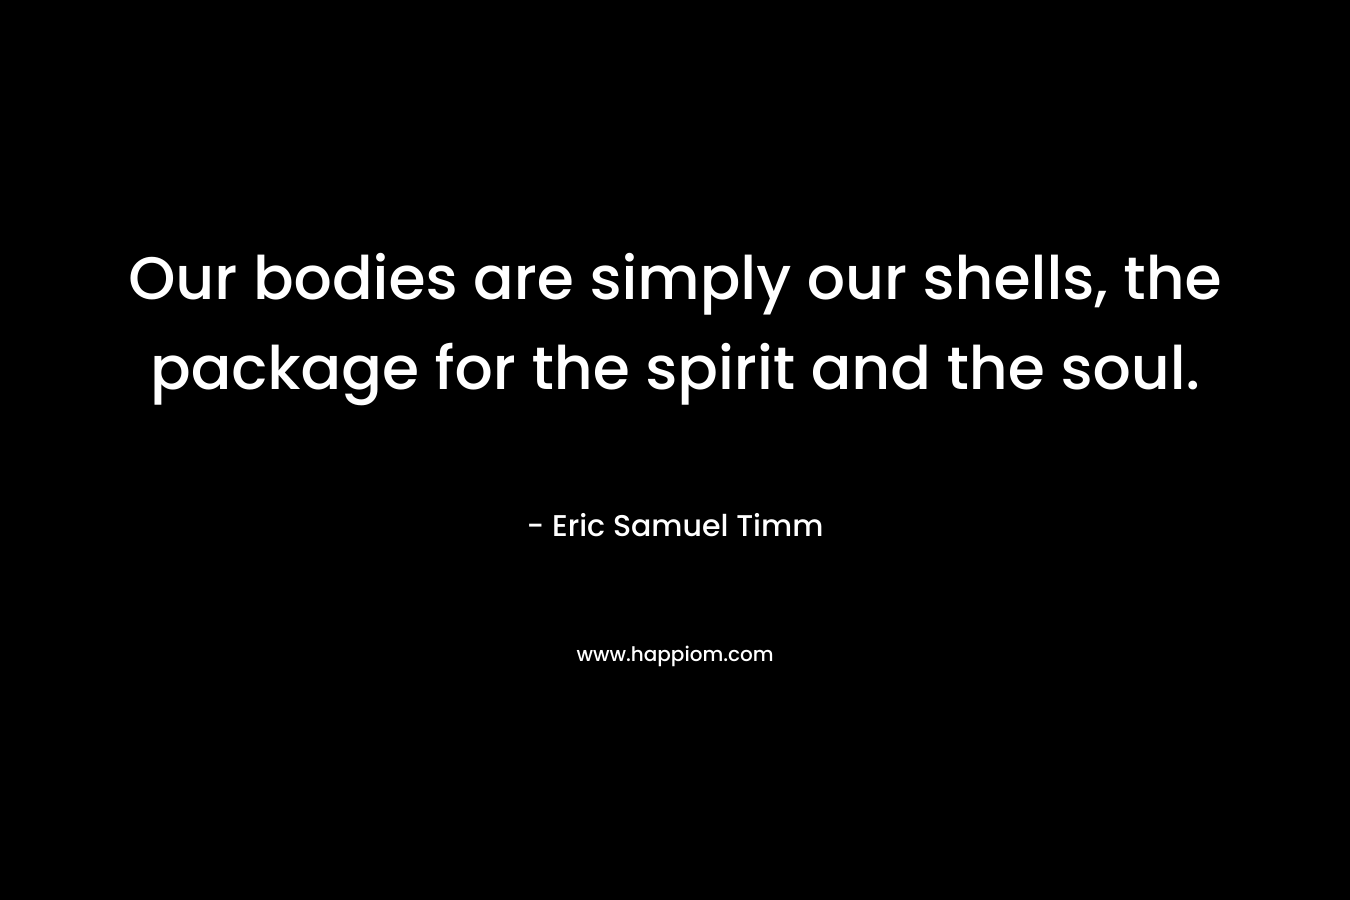 Our bodies are simply our shells, the package for the spirit and the soul. – Eric Samuel Timm